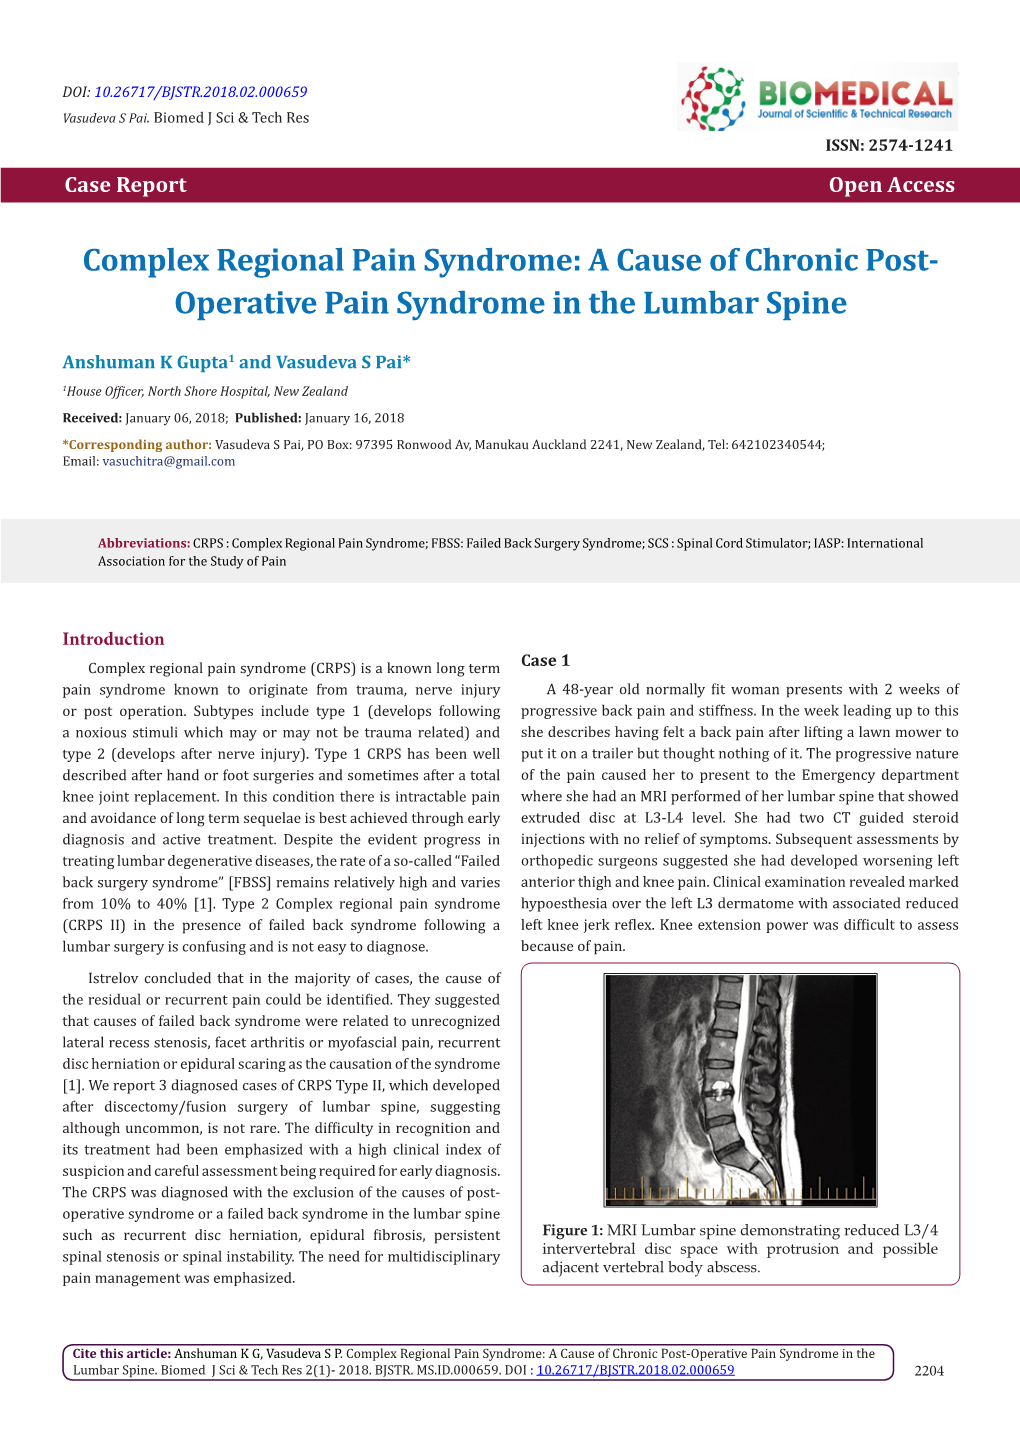 A Cause of Chronic Post-Operative Pain Syndrome in the Lumbar Spine